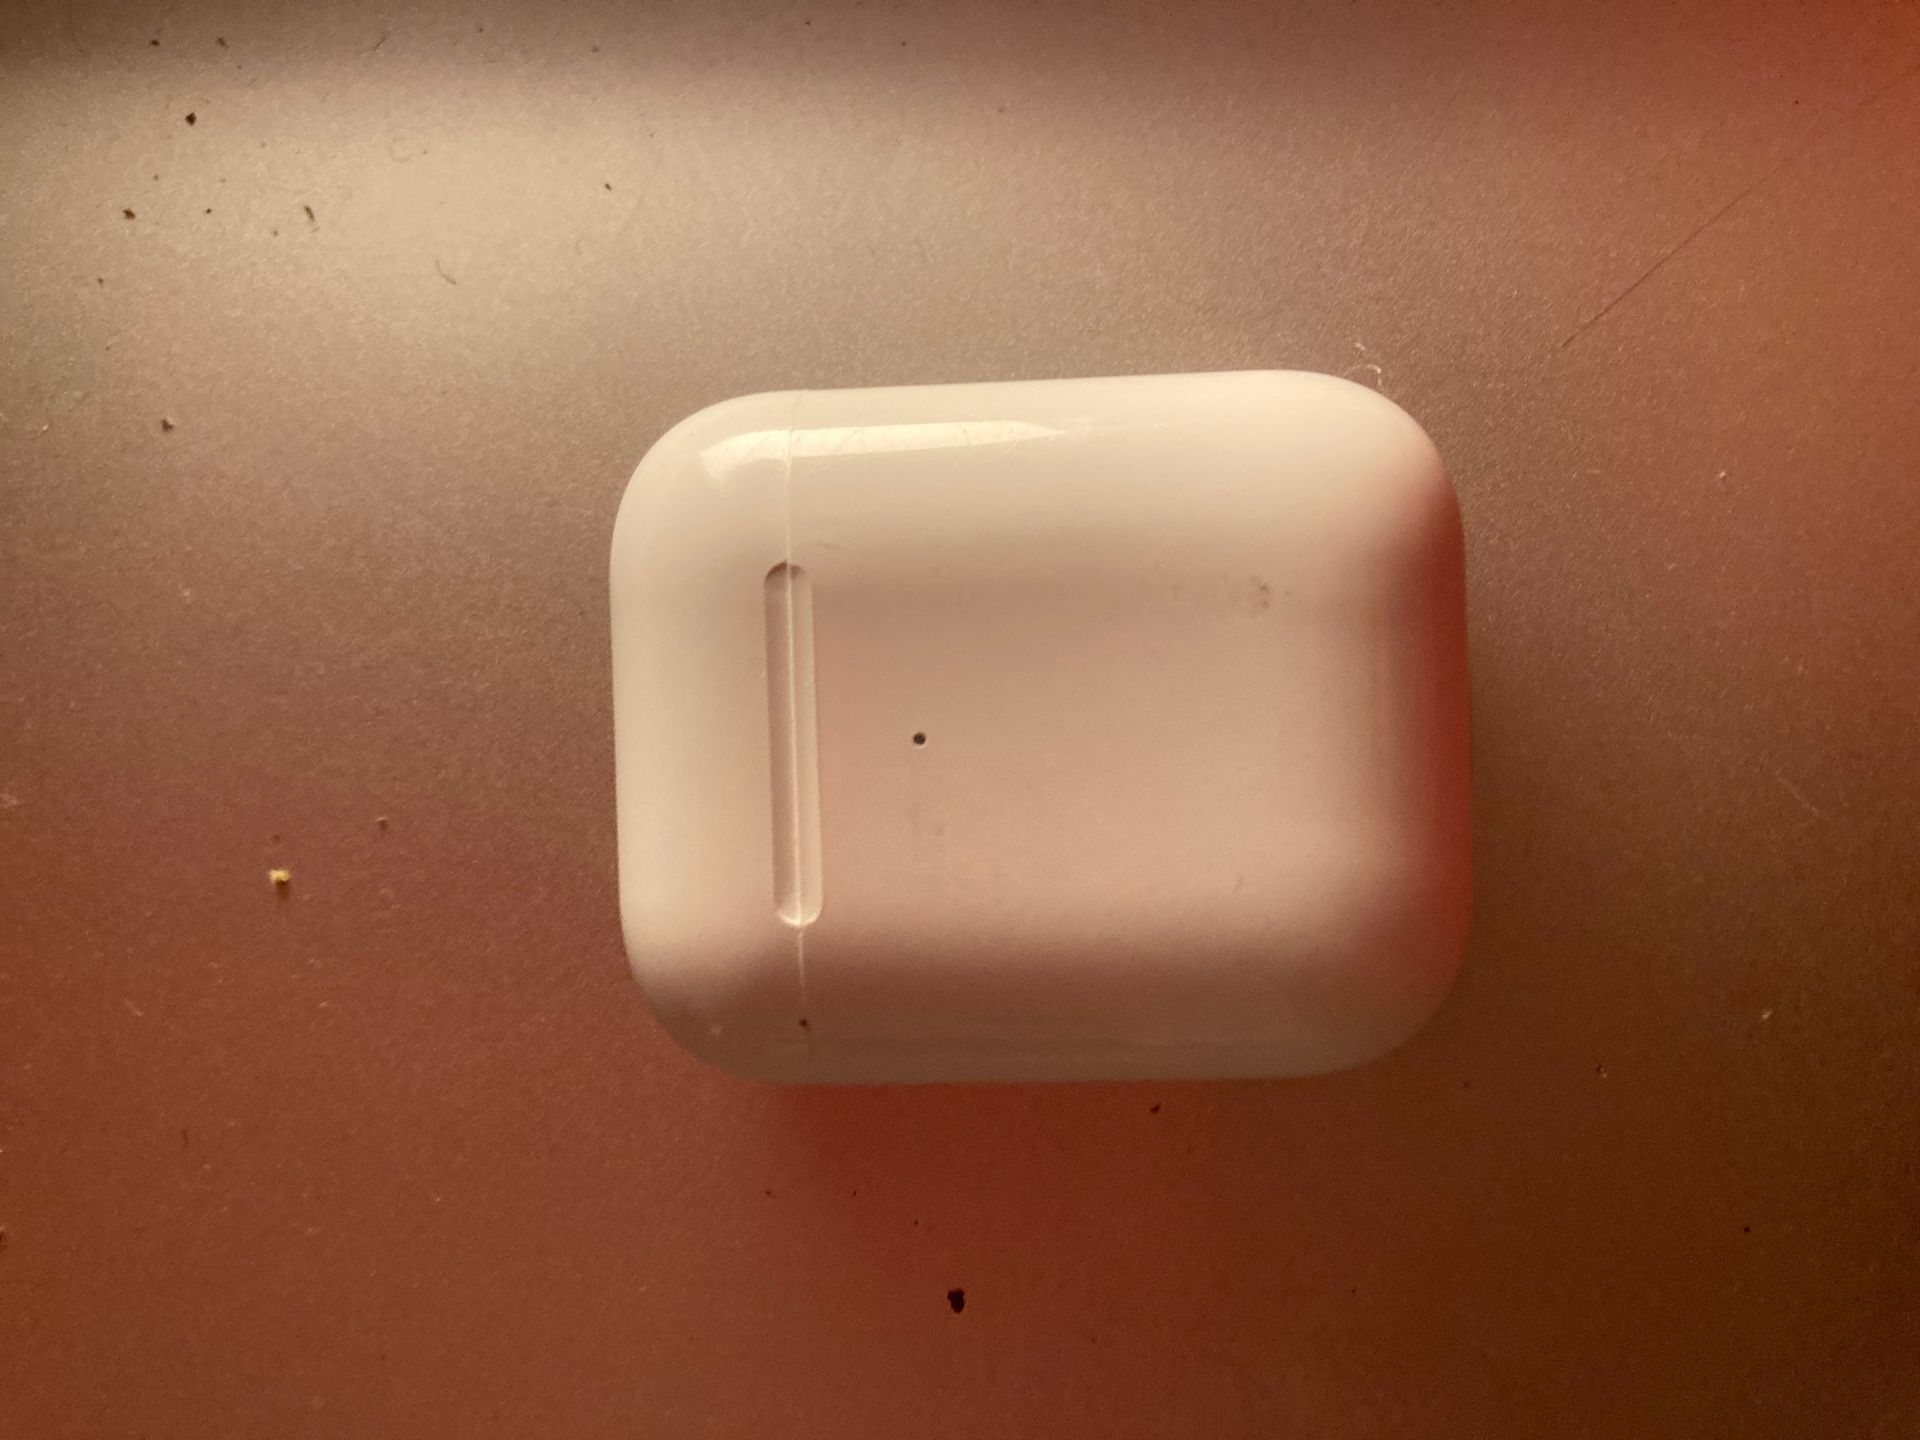 Air pods good condition TRADES ONLY